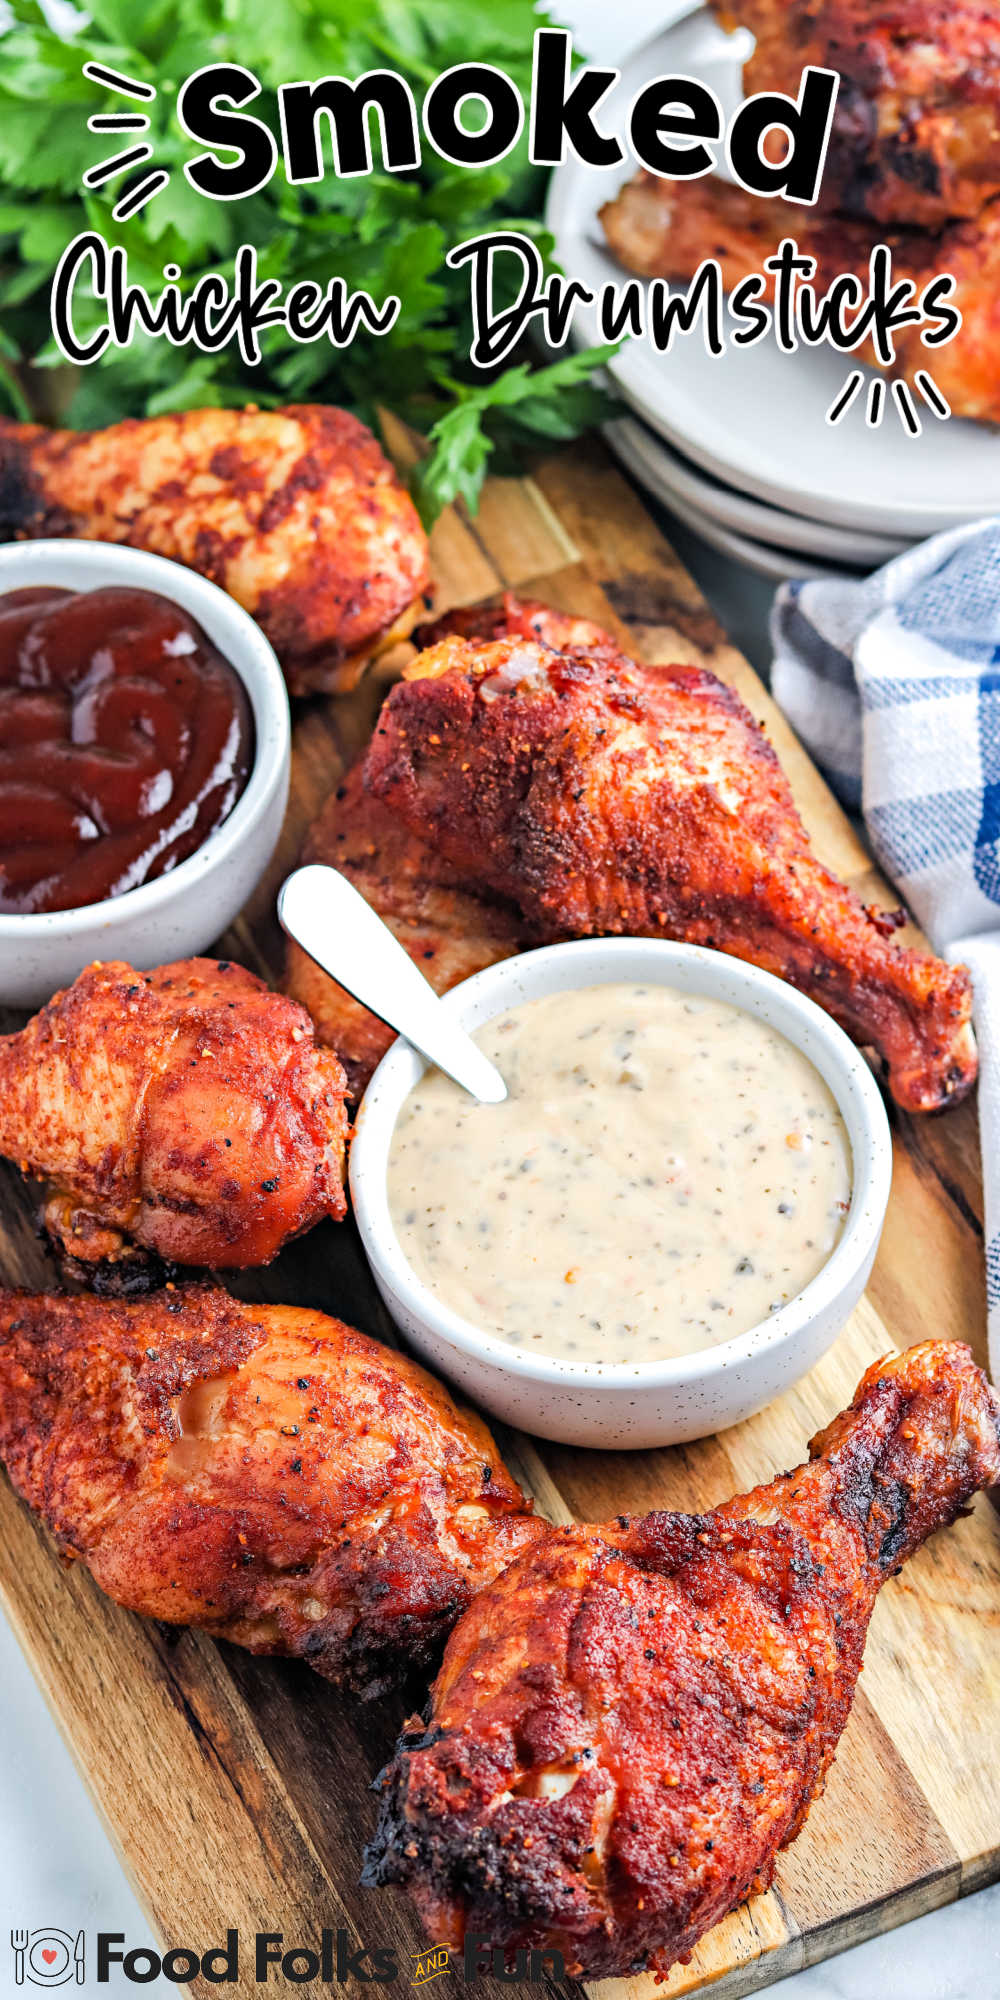 Smoked Chicken Drumsticks or chicken legs are an easy, economical smoker recipe that is perfect for beginners. They’re tasty, ready in 70 minutes, and always a crowd pleaser. via @foodfolksandfun